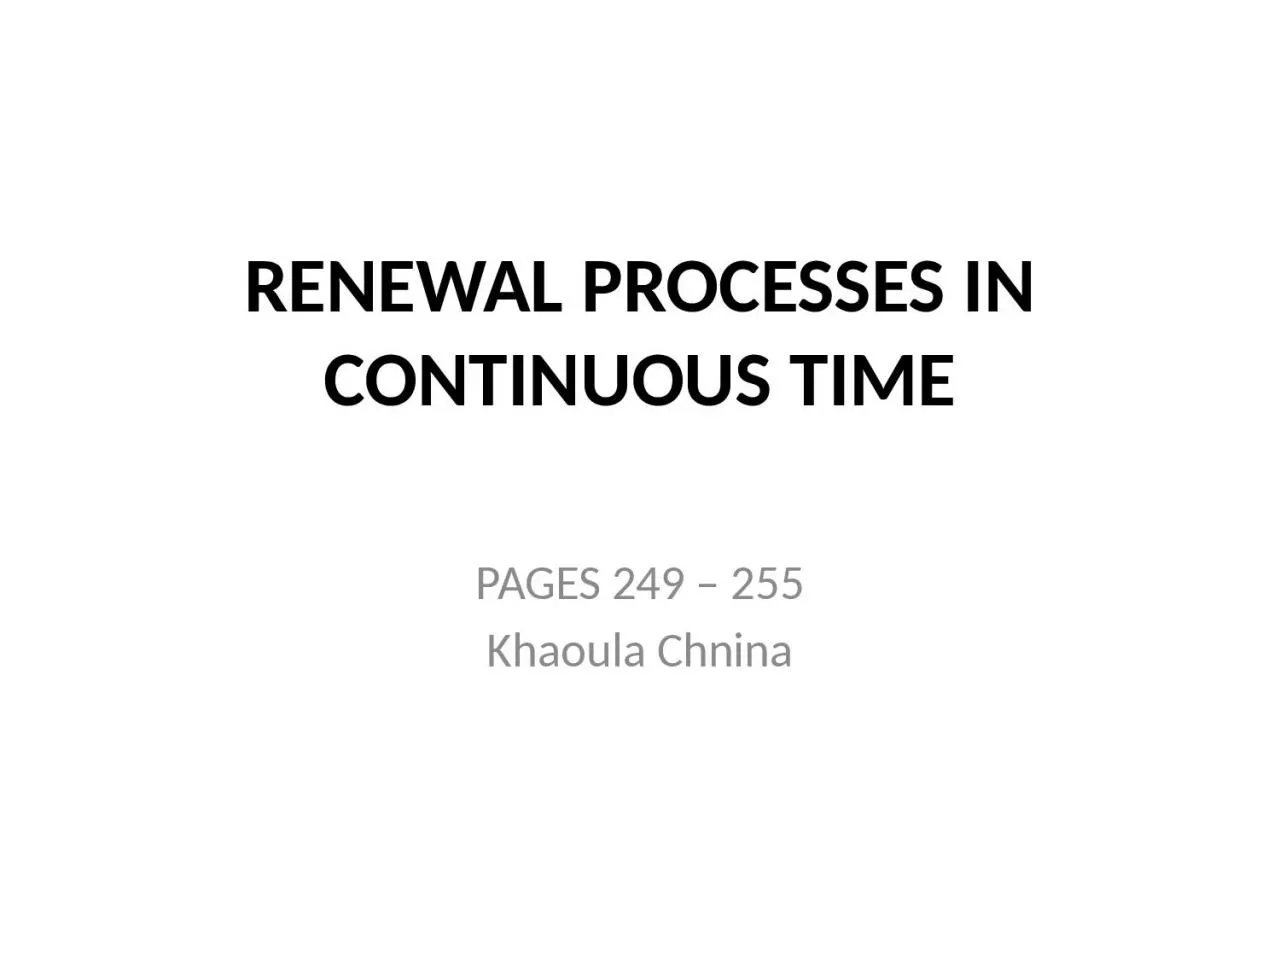 RENEWAL PROCESSES IN CONTINUOUS TIME